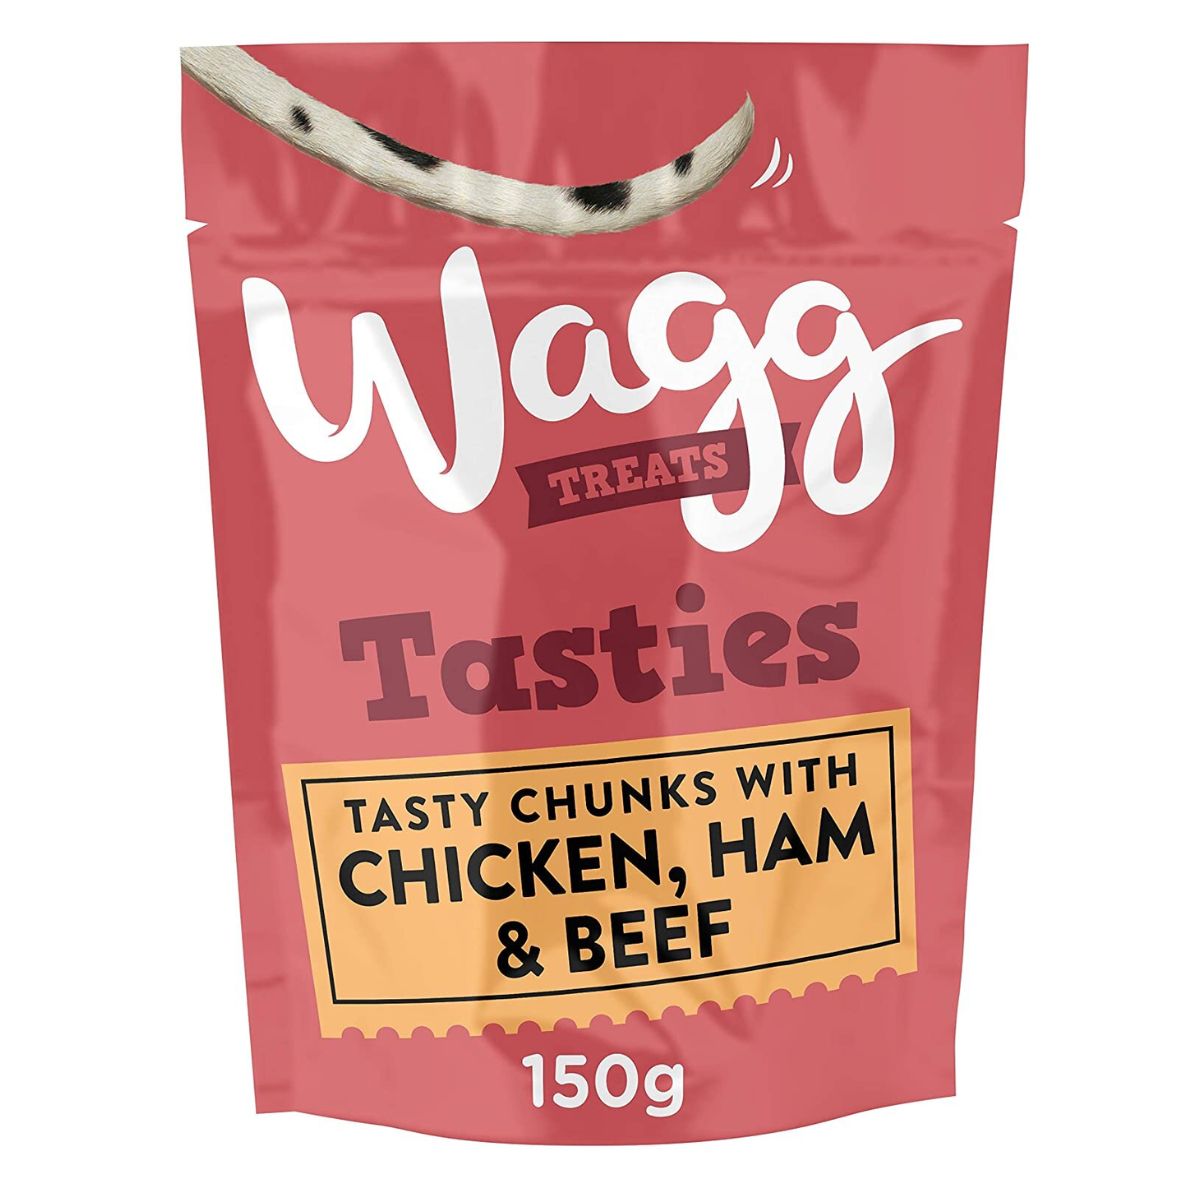 Wagg - Tasties Tasty Chunks Treats - 150g with chicken and ham.